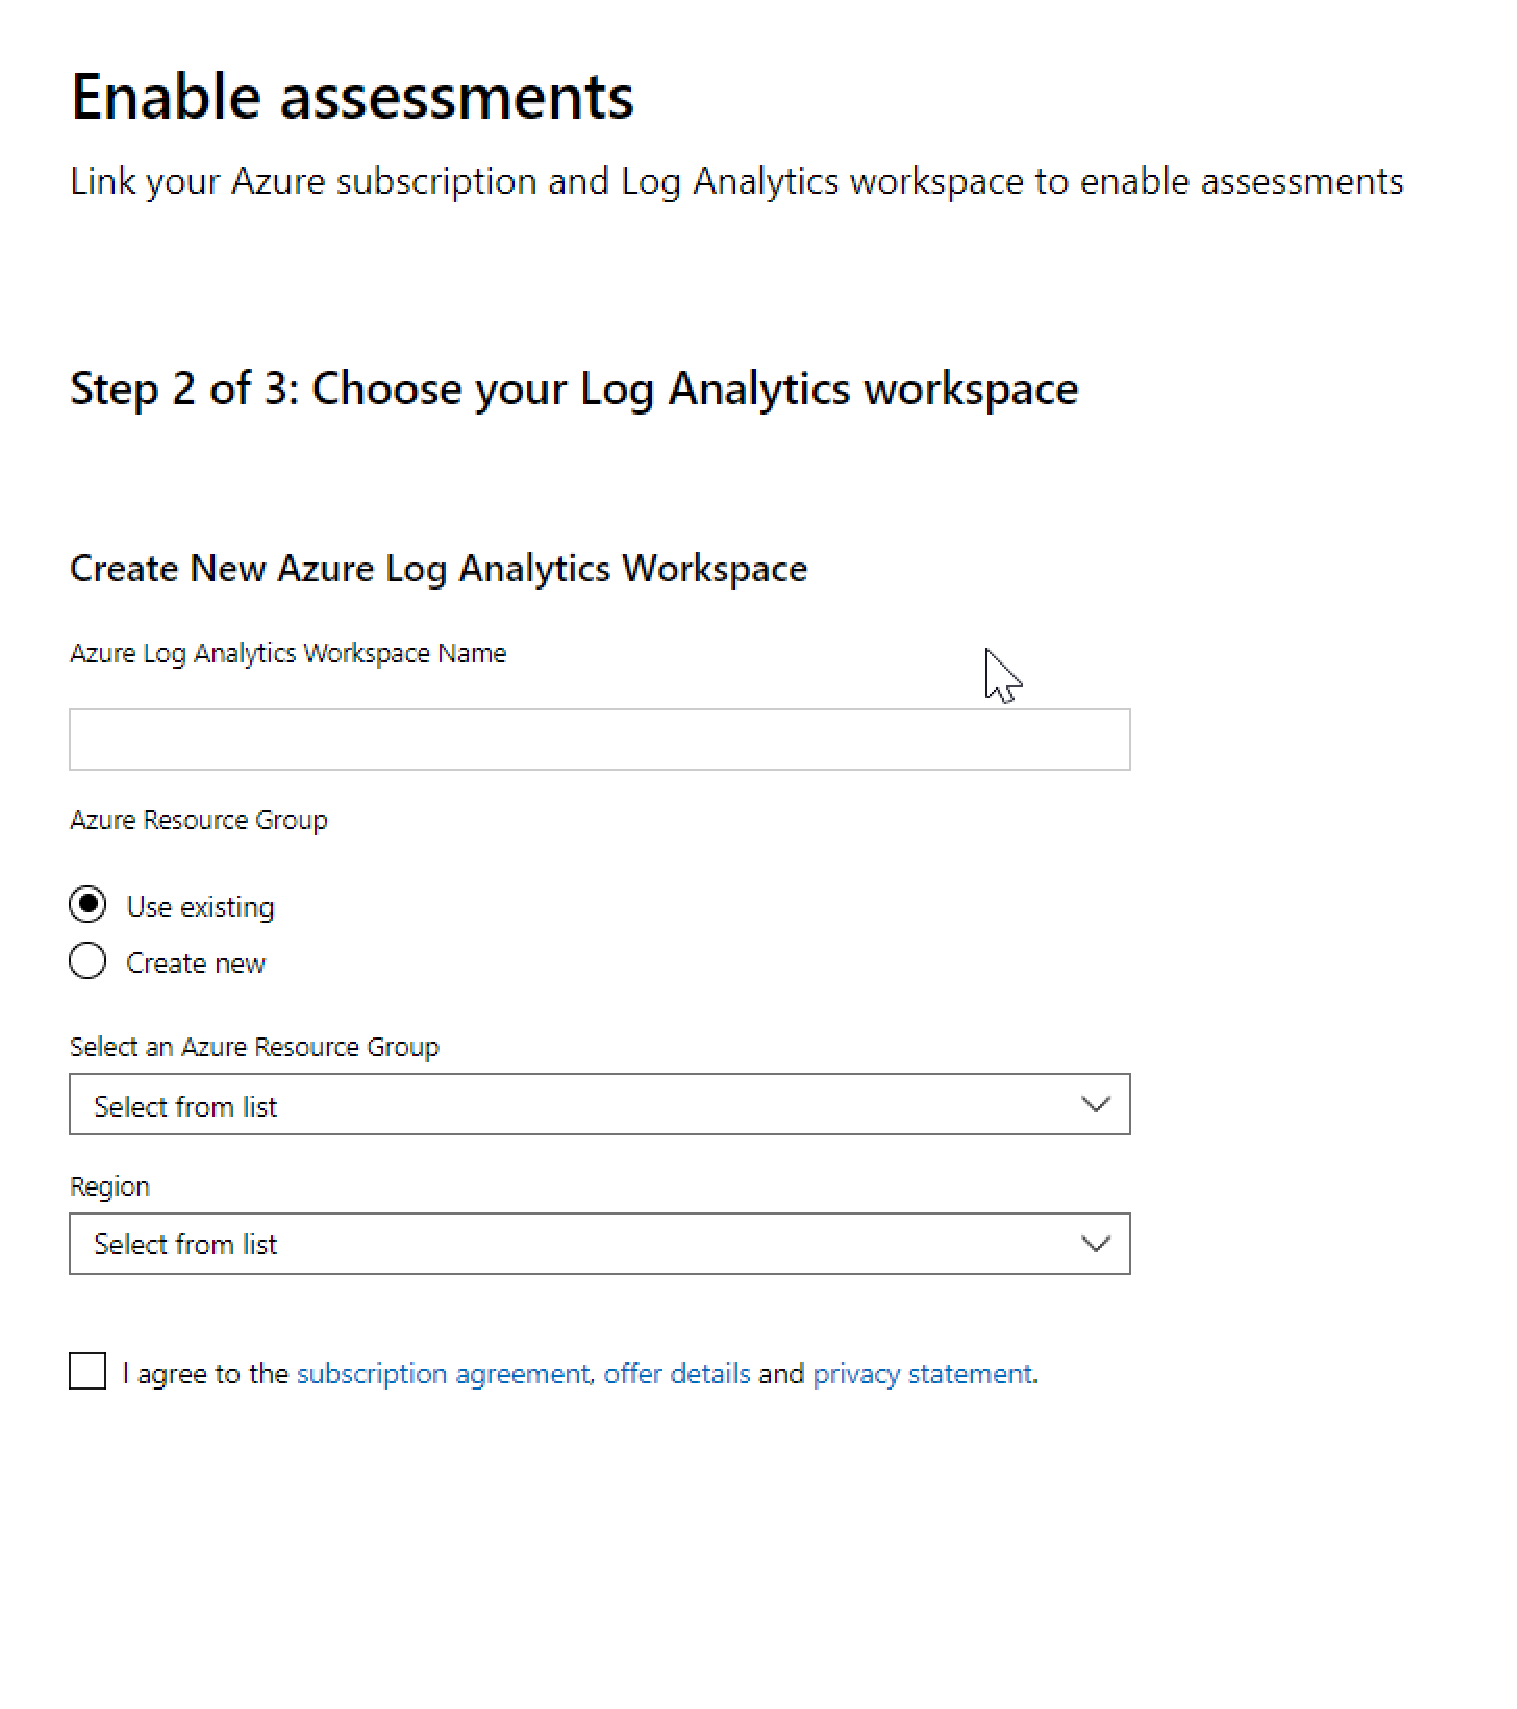 Enable assessments screen, which shows the Choose your Log Analytics workspace dialog.